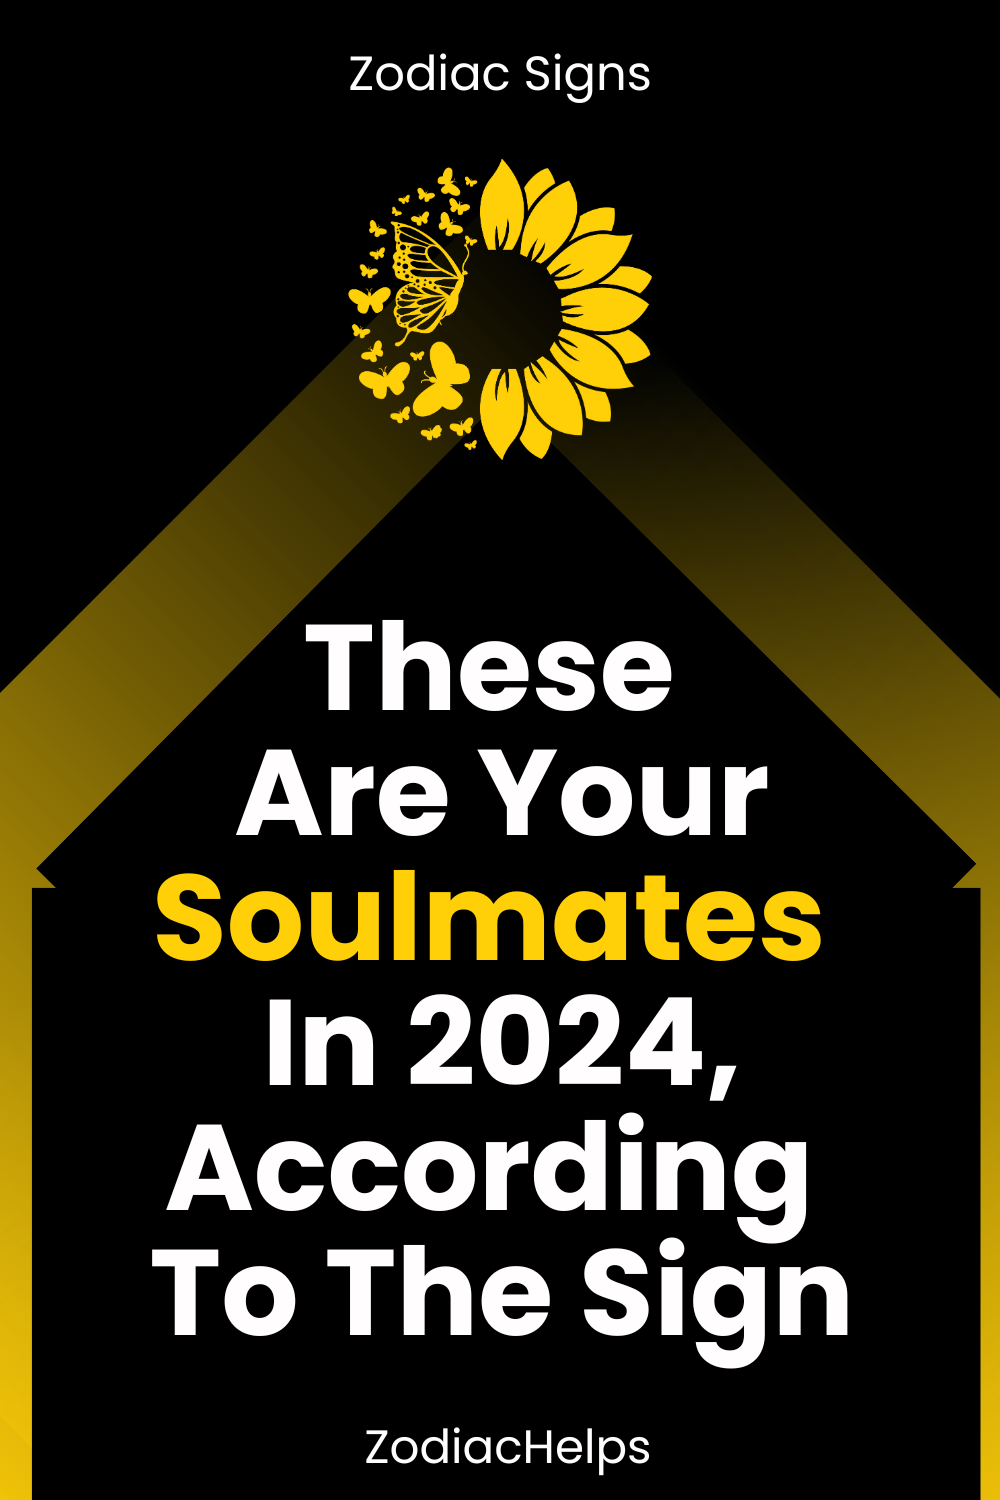 These Are Your Soulmates In 2024 According To The Sign 1 